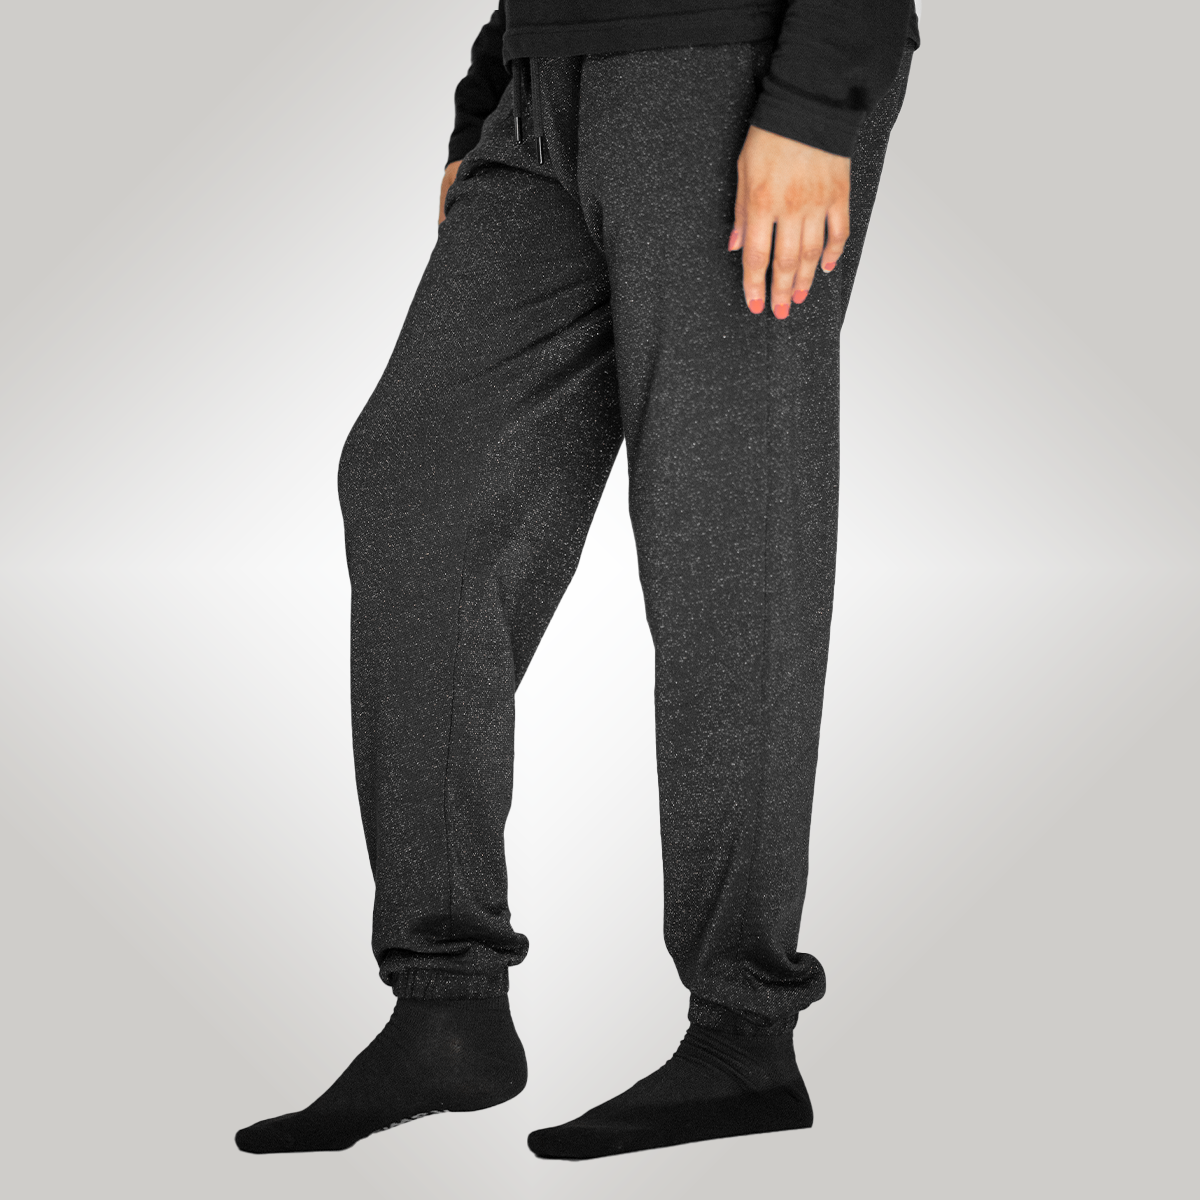 Glittery men's Jogger Pants Chic and Trendy -Black